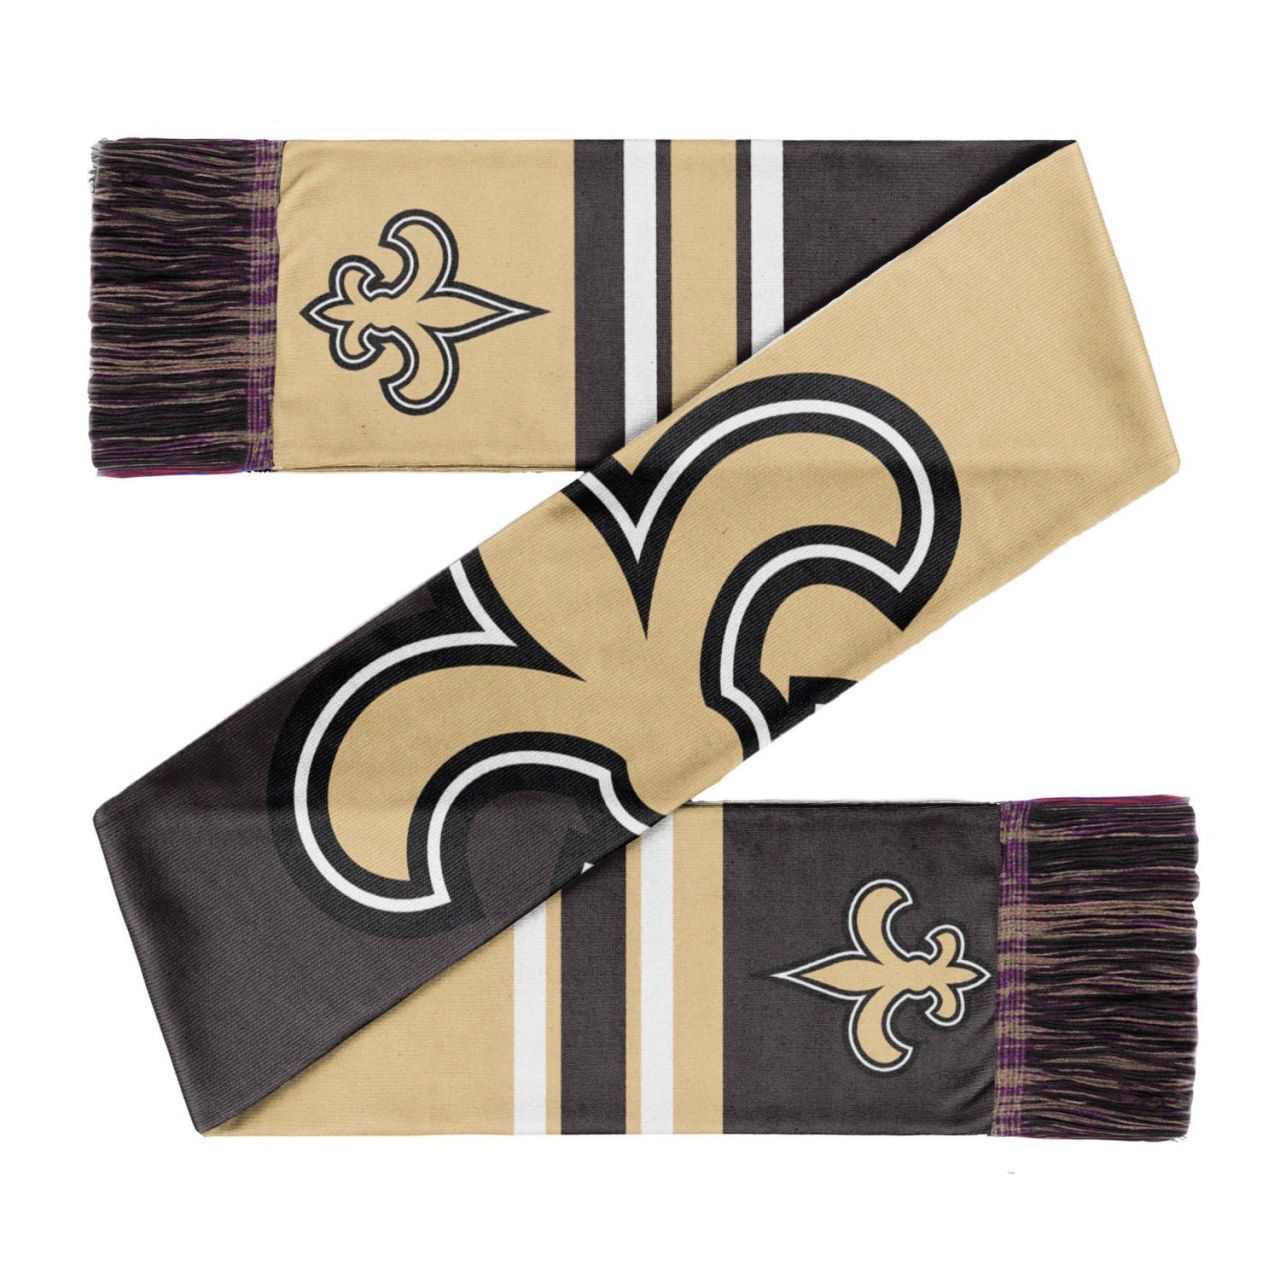 amfoo - Forever Collectibles Schal - BIG LOGO New Orleans Saints